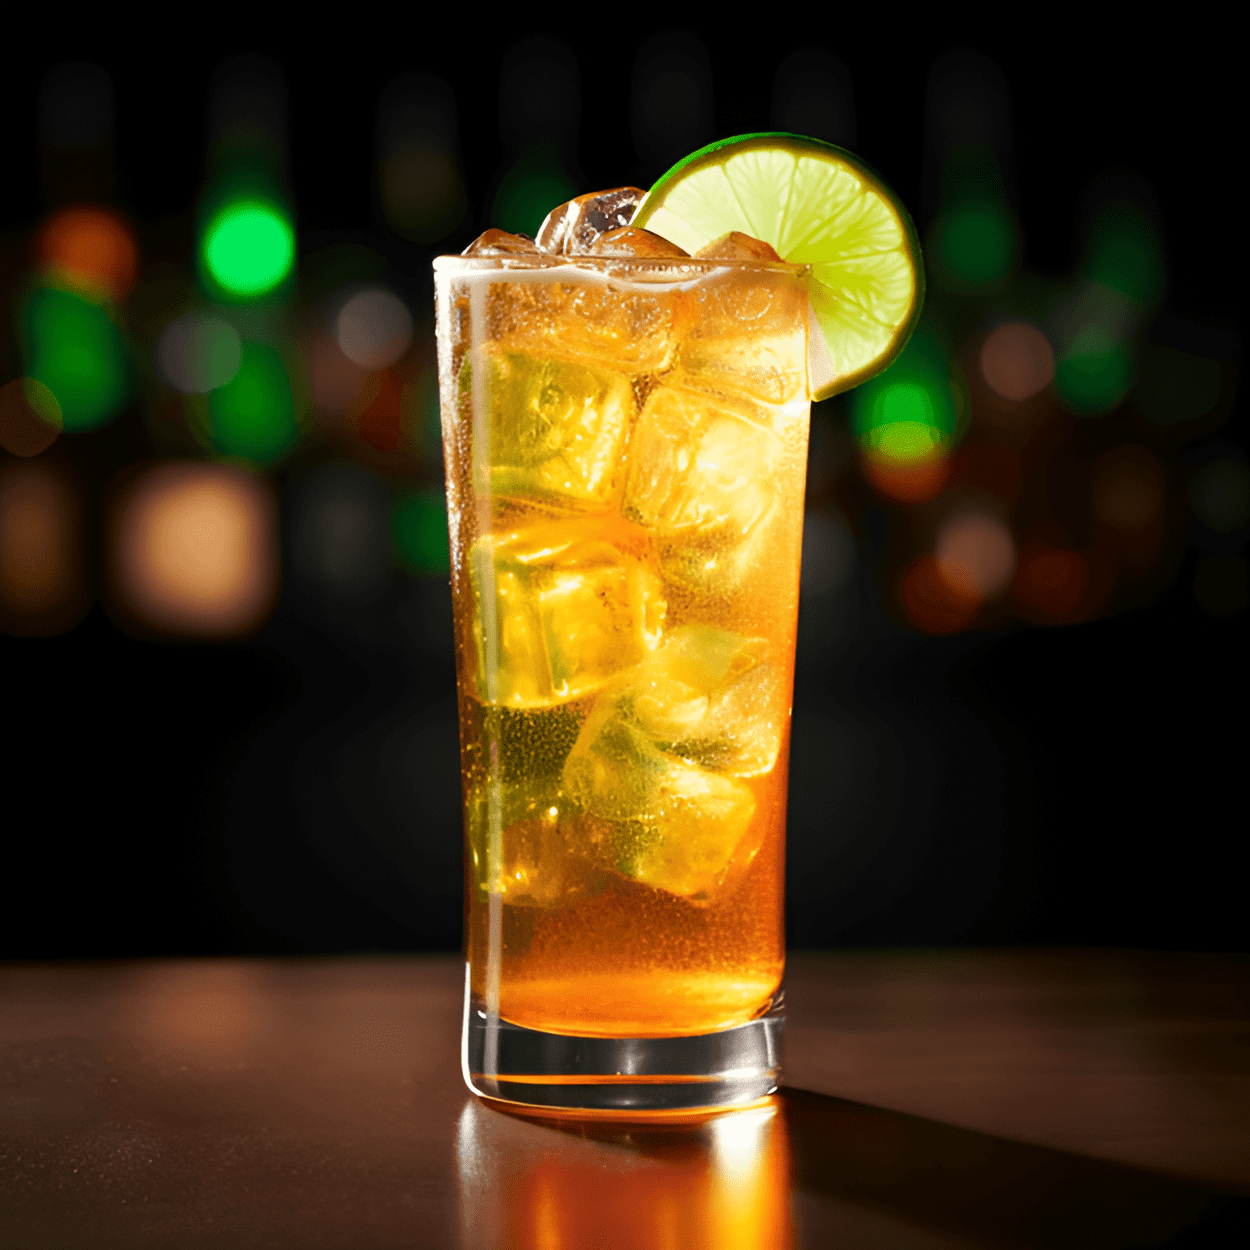 Colorado Kool Aid Cocktail Recipe - The Colorado Kool Aid has a crisp, refreshing taste with a malty undertone from the beer. The whiskey adds a warm, spicy kick that balances out the coolness of the beer. It's a strong, robust drink that's not overly sweet or sour.